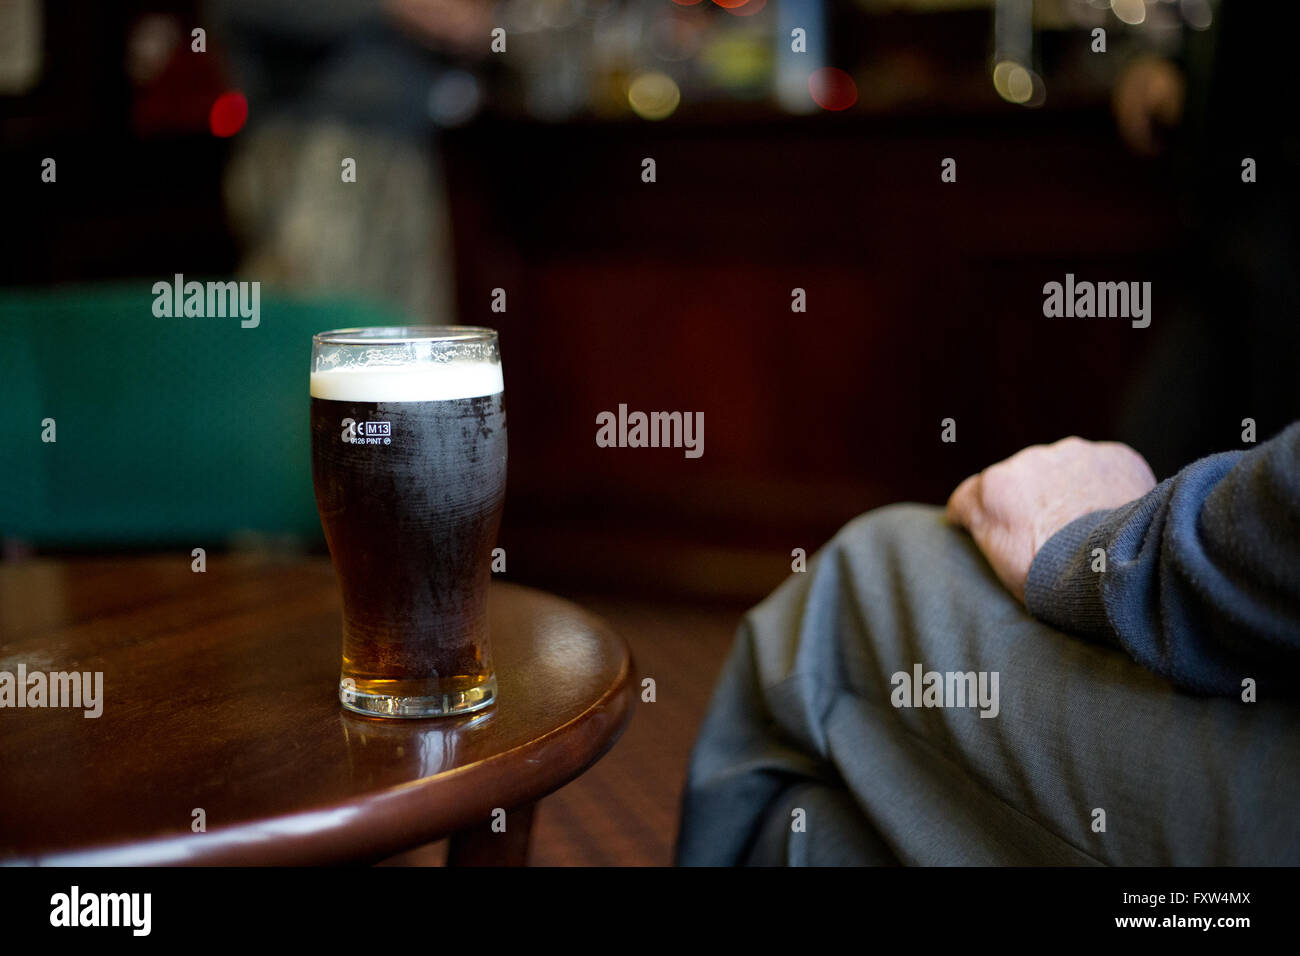 https://c8.alamy.com/comp/FXW4MX/a-photograph-of-a-pint-of-beer-on-a-table-with-a-mans-hand-and-leg-FXW4MX.jpg